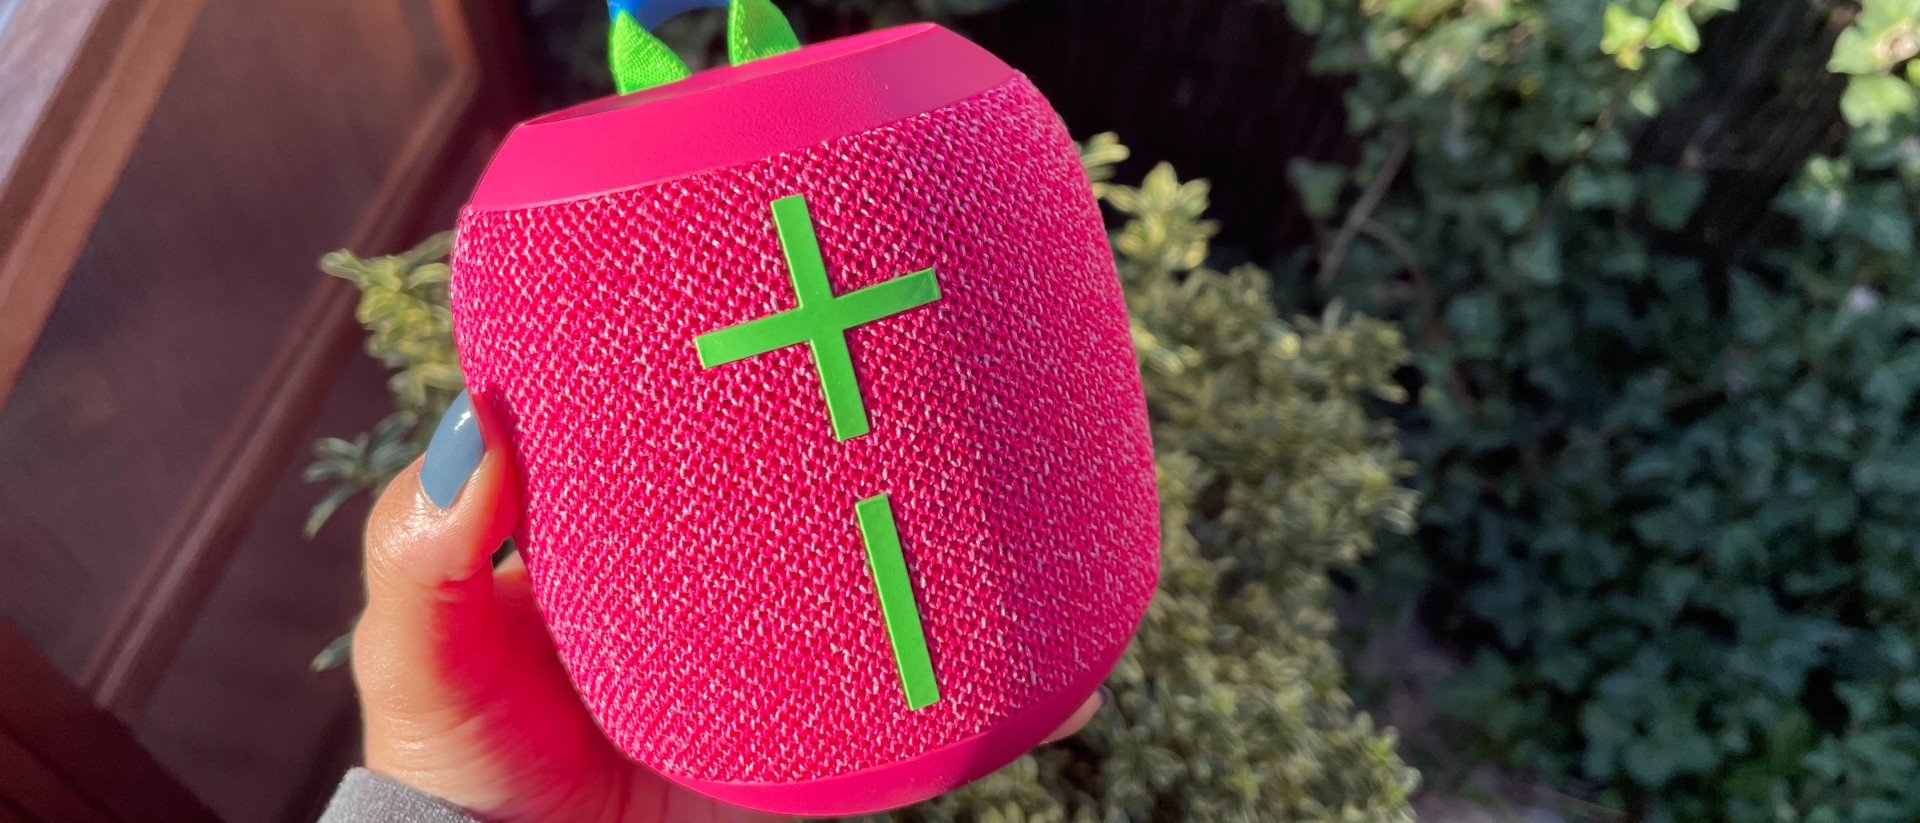 New Wonderboom 3 Bluetooth speaker is a big disappointment – I expected  better